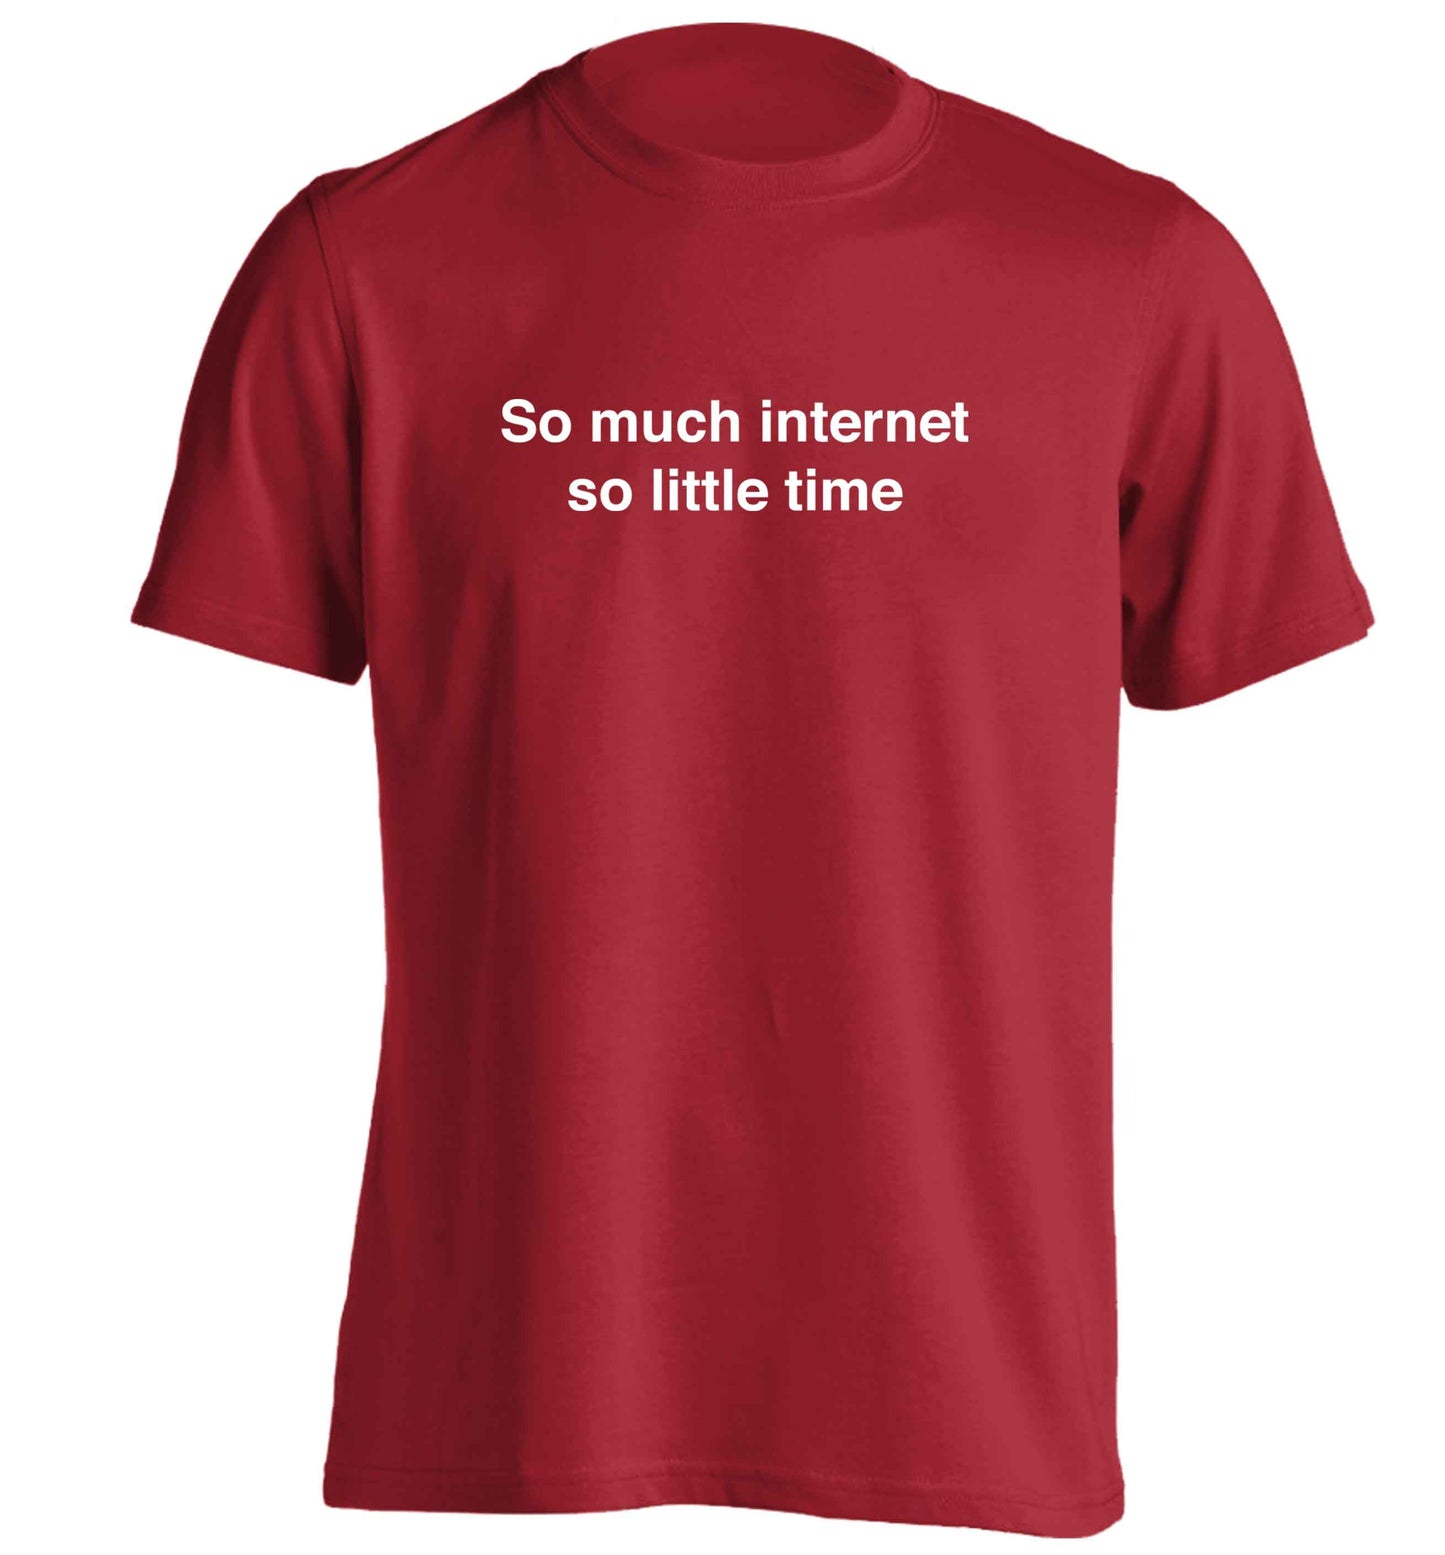 So much internet so little time adults unisex red Tshirt 2XL